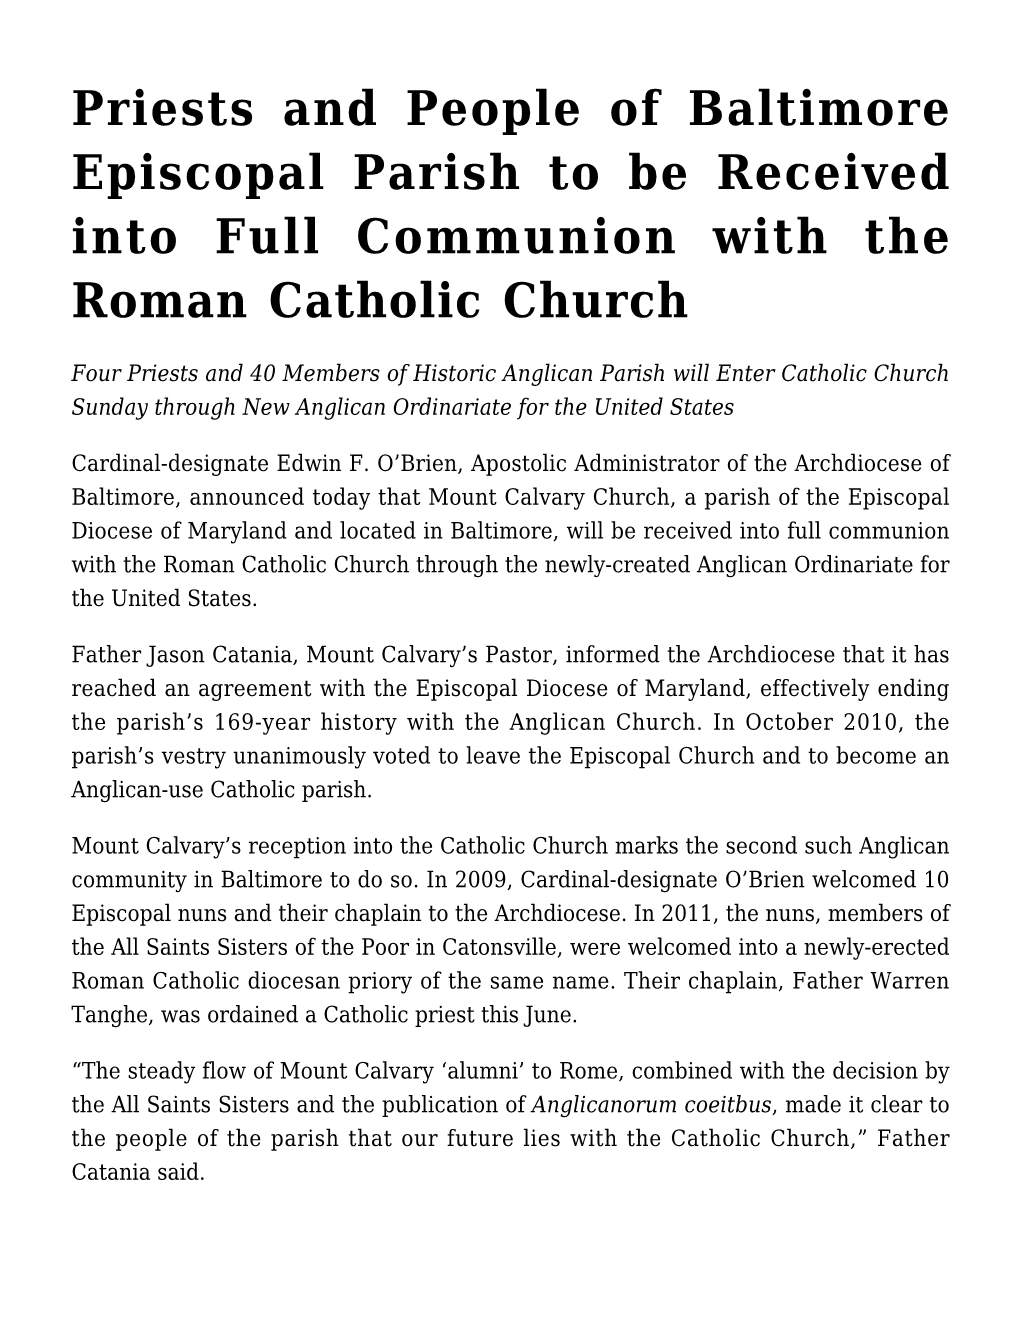 Priests and People of Baltimore Episcopal Parish to Be Received Into Full Communion with the Roman Catholic Church